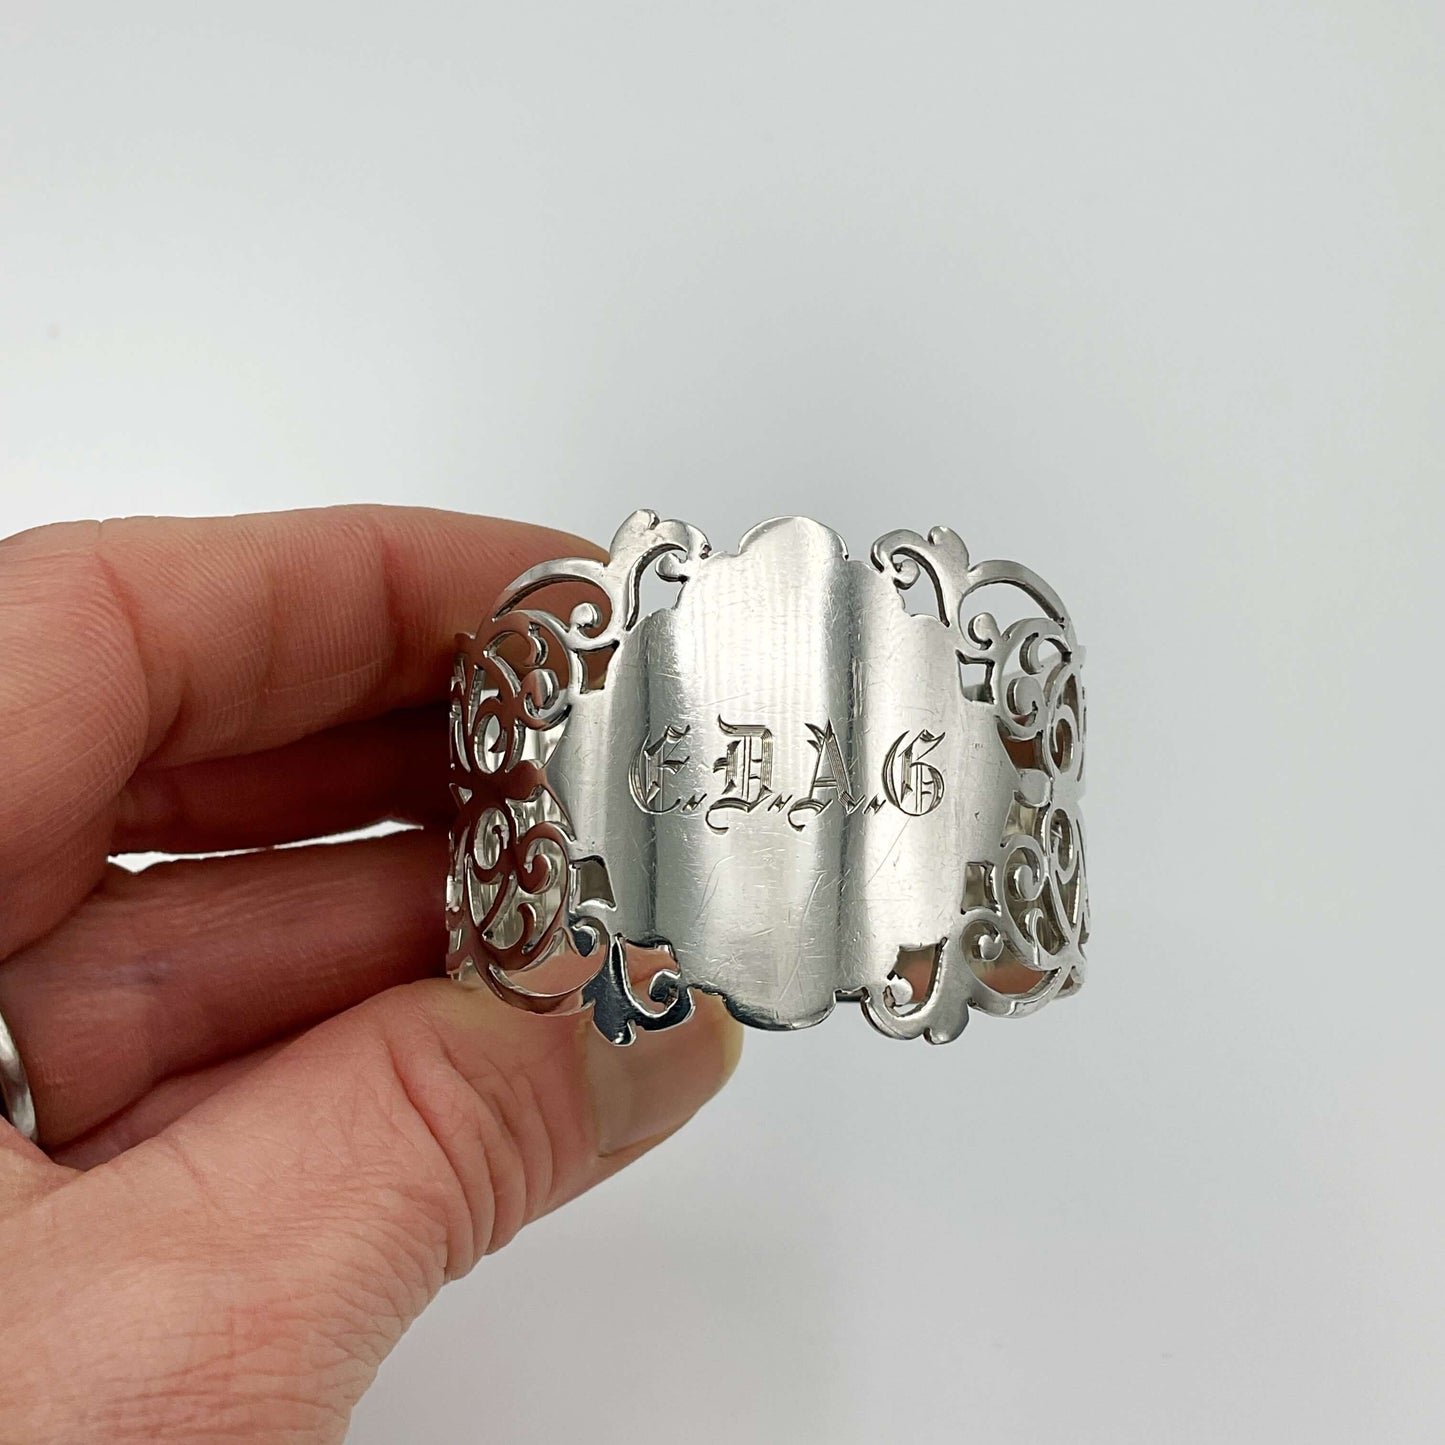 Shiny napkin ring with elaborate sides and EDAG in the centre held in a hand on a plain background 